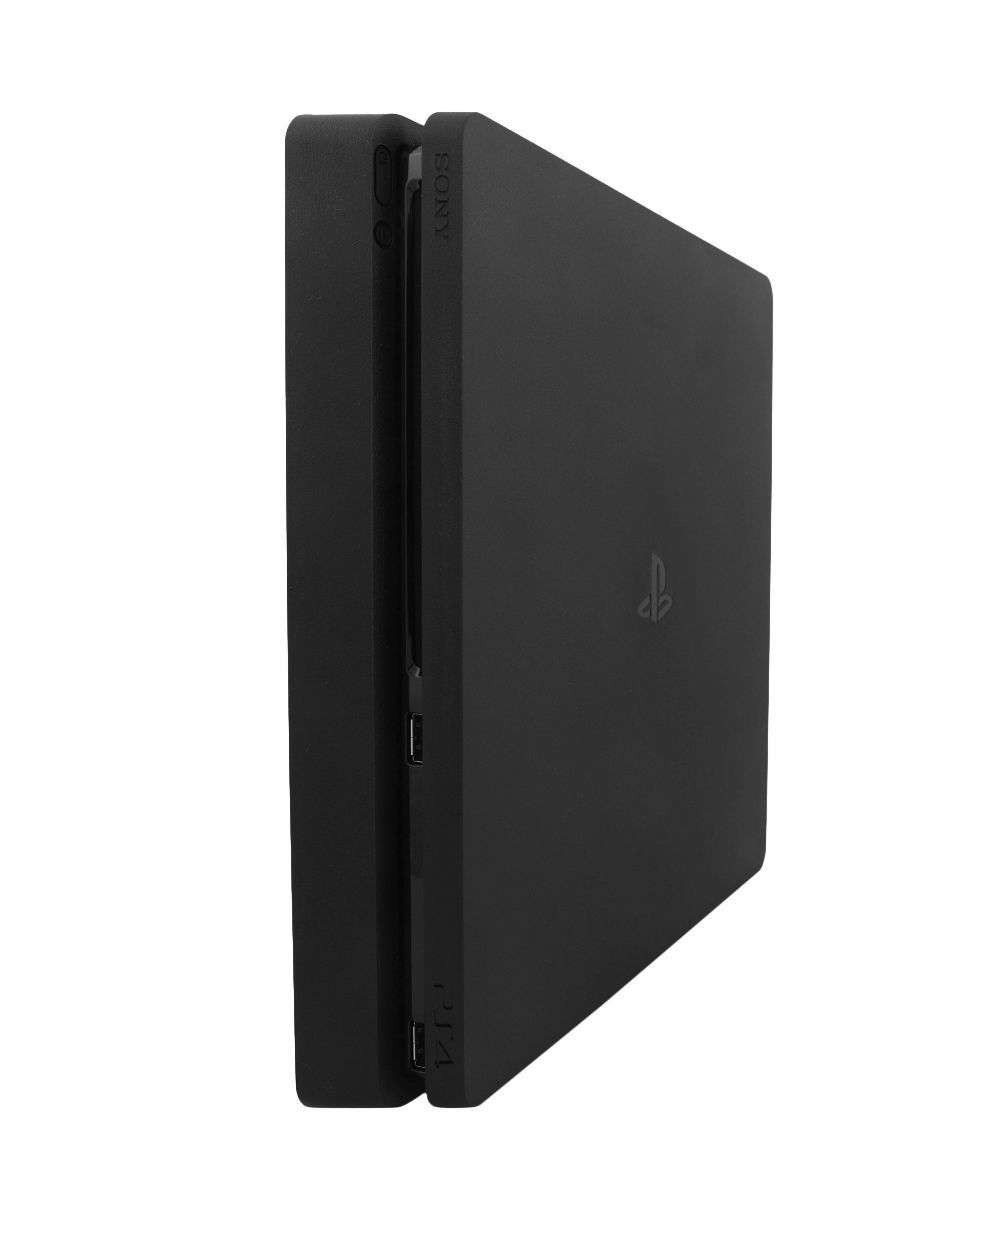 Sony PlayStation 4 Slim 1TB CUH-2216B-FB (Black) | Buy Gaming Consoles online | Best price and